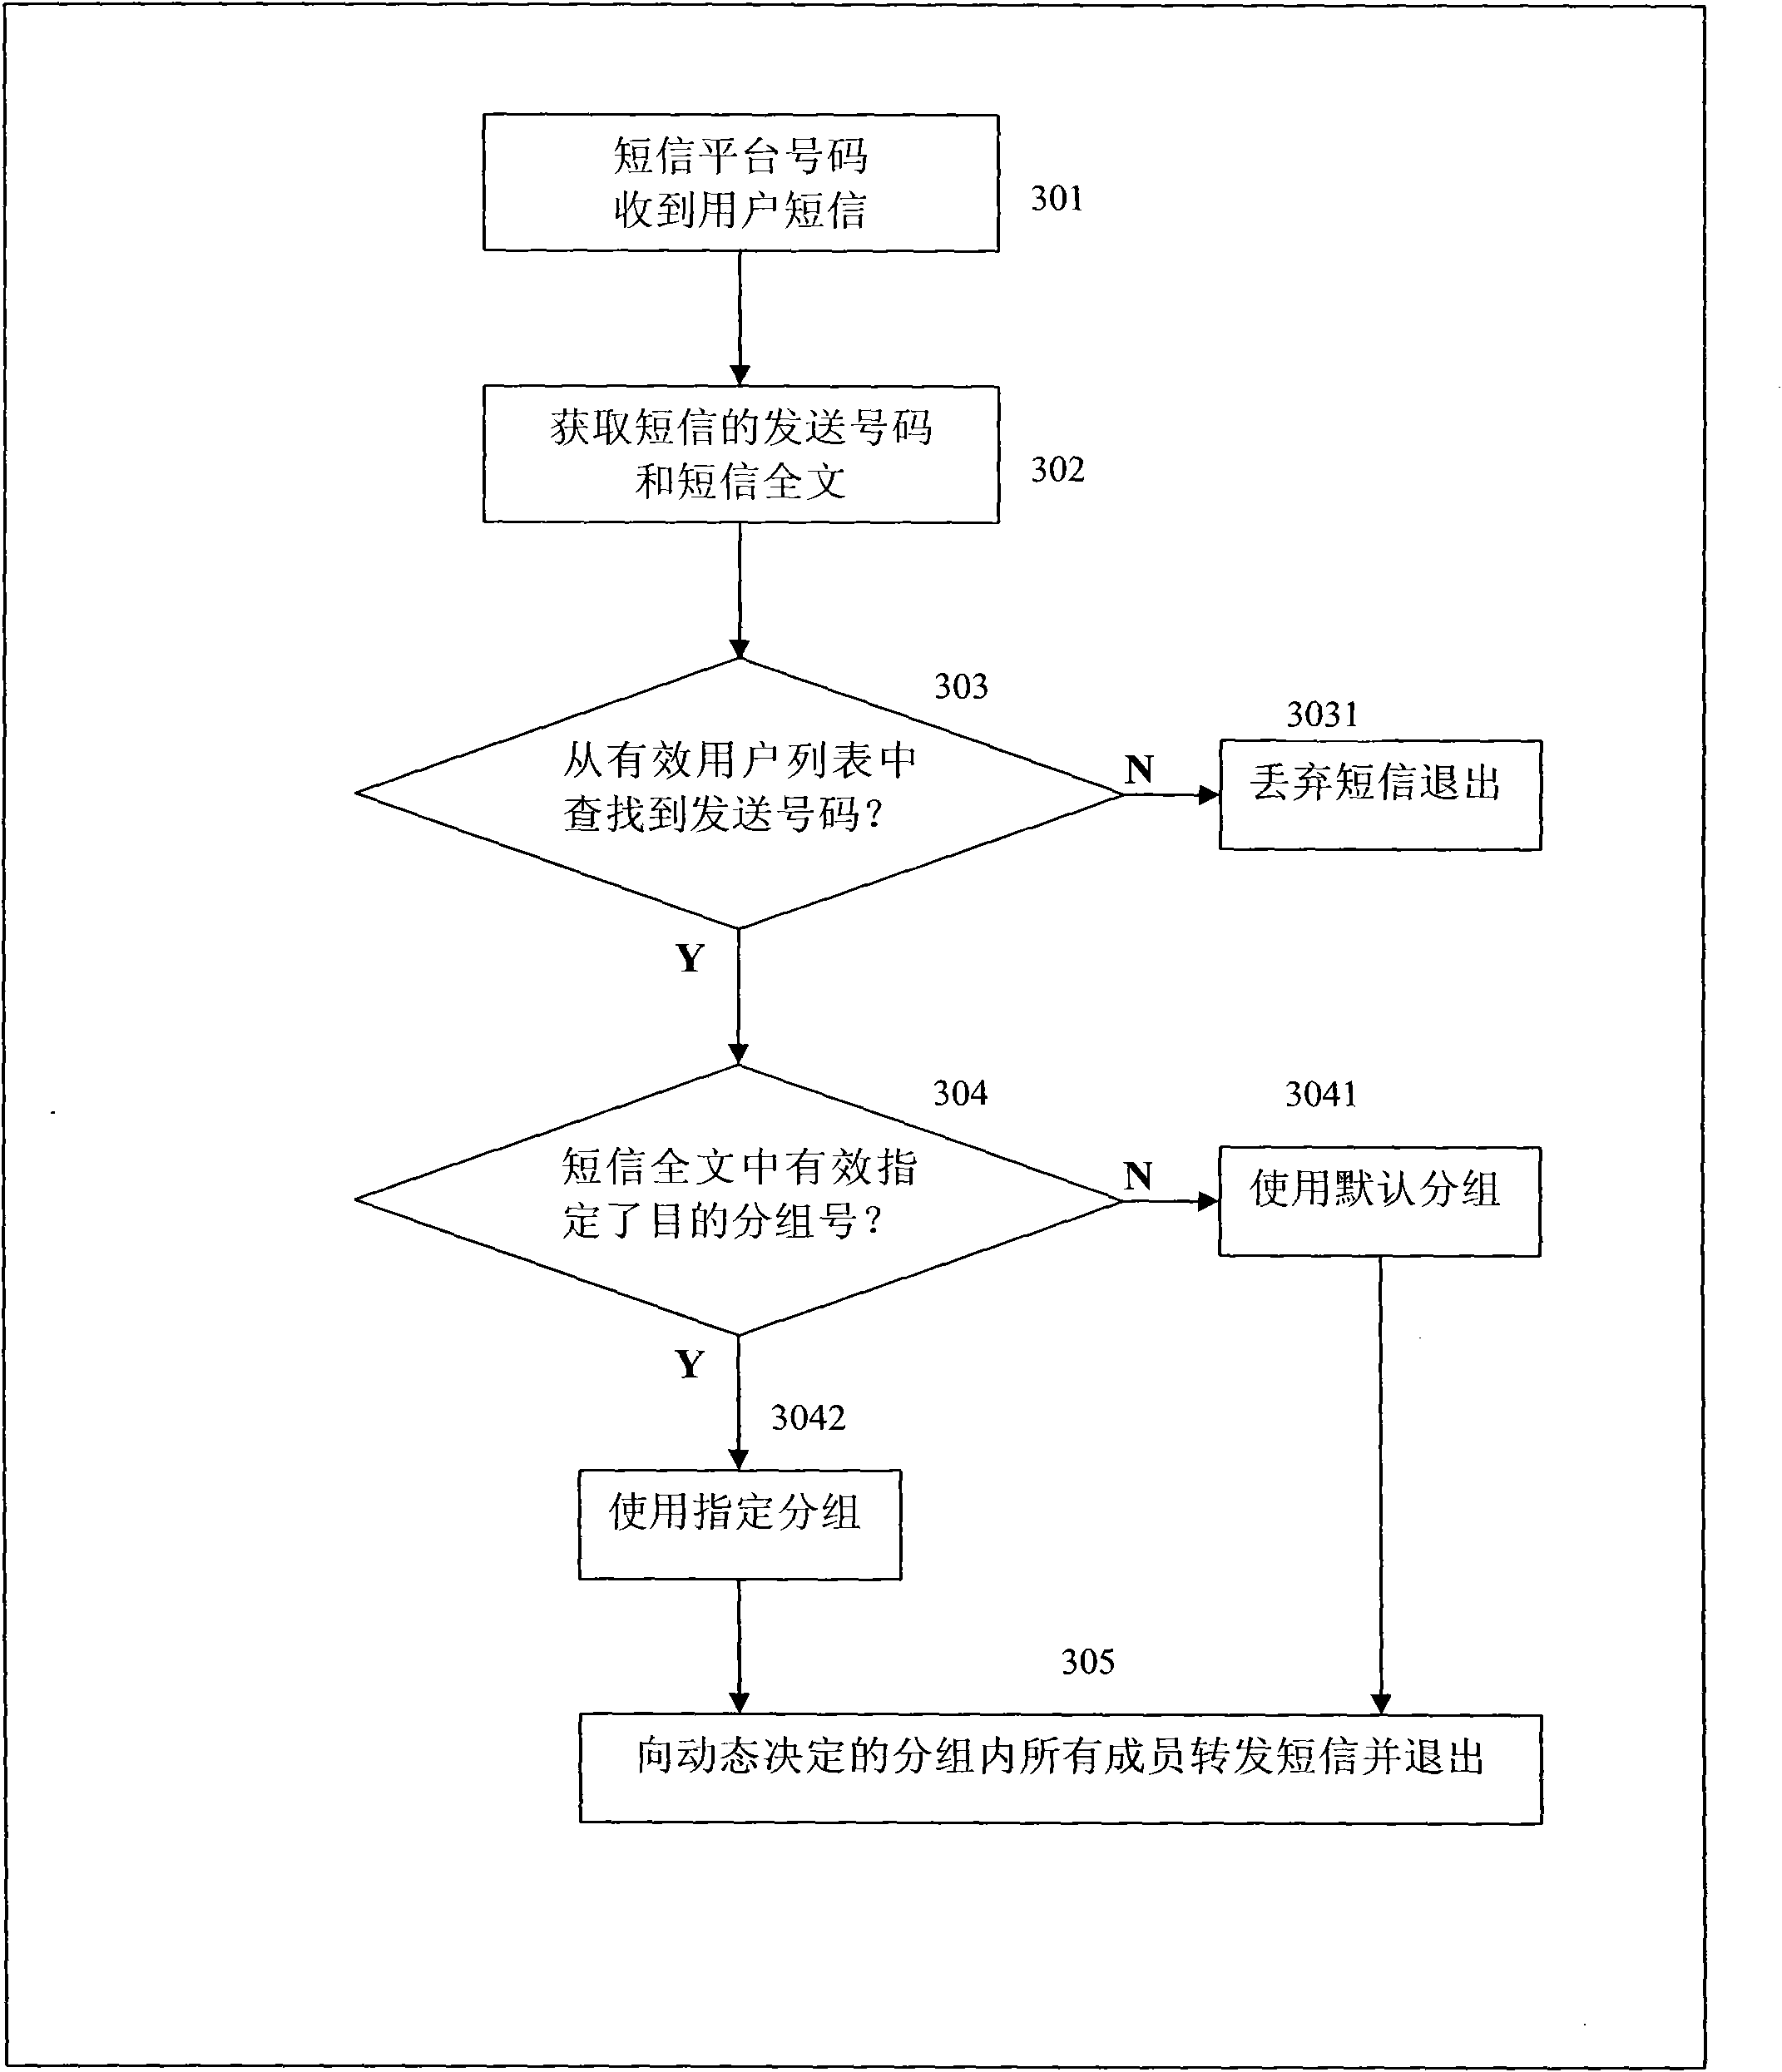 Short message grouping and dynamic forwarding method